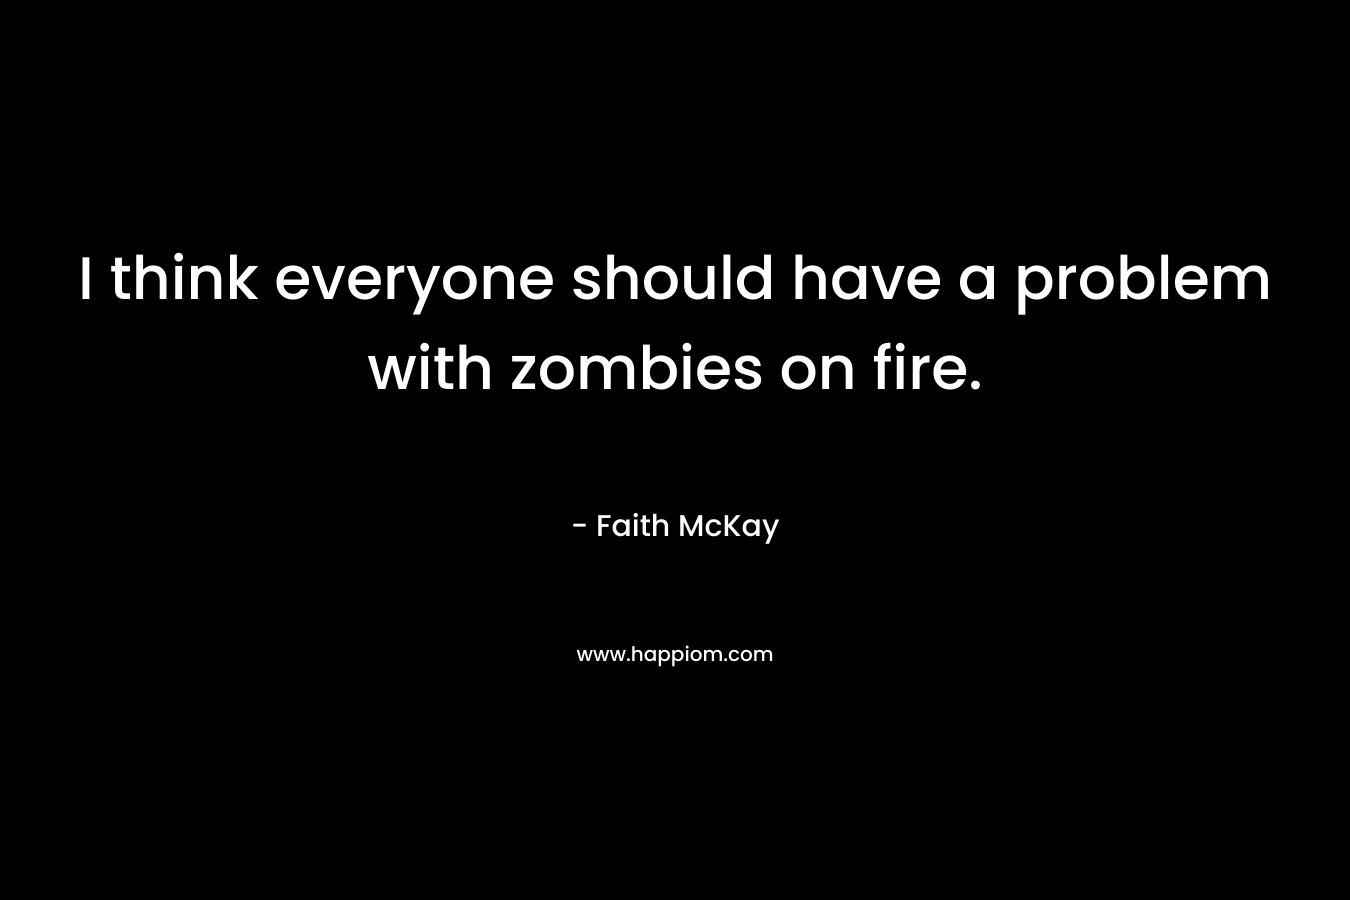 I think everyone should have a problem with zombies on fire.